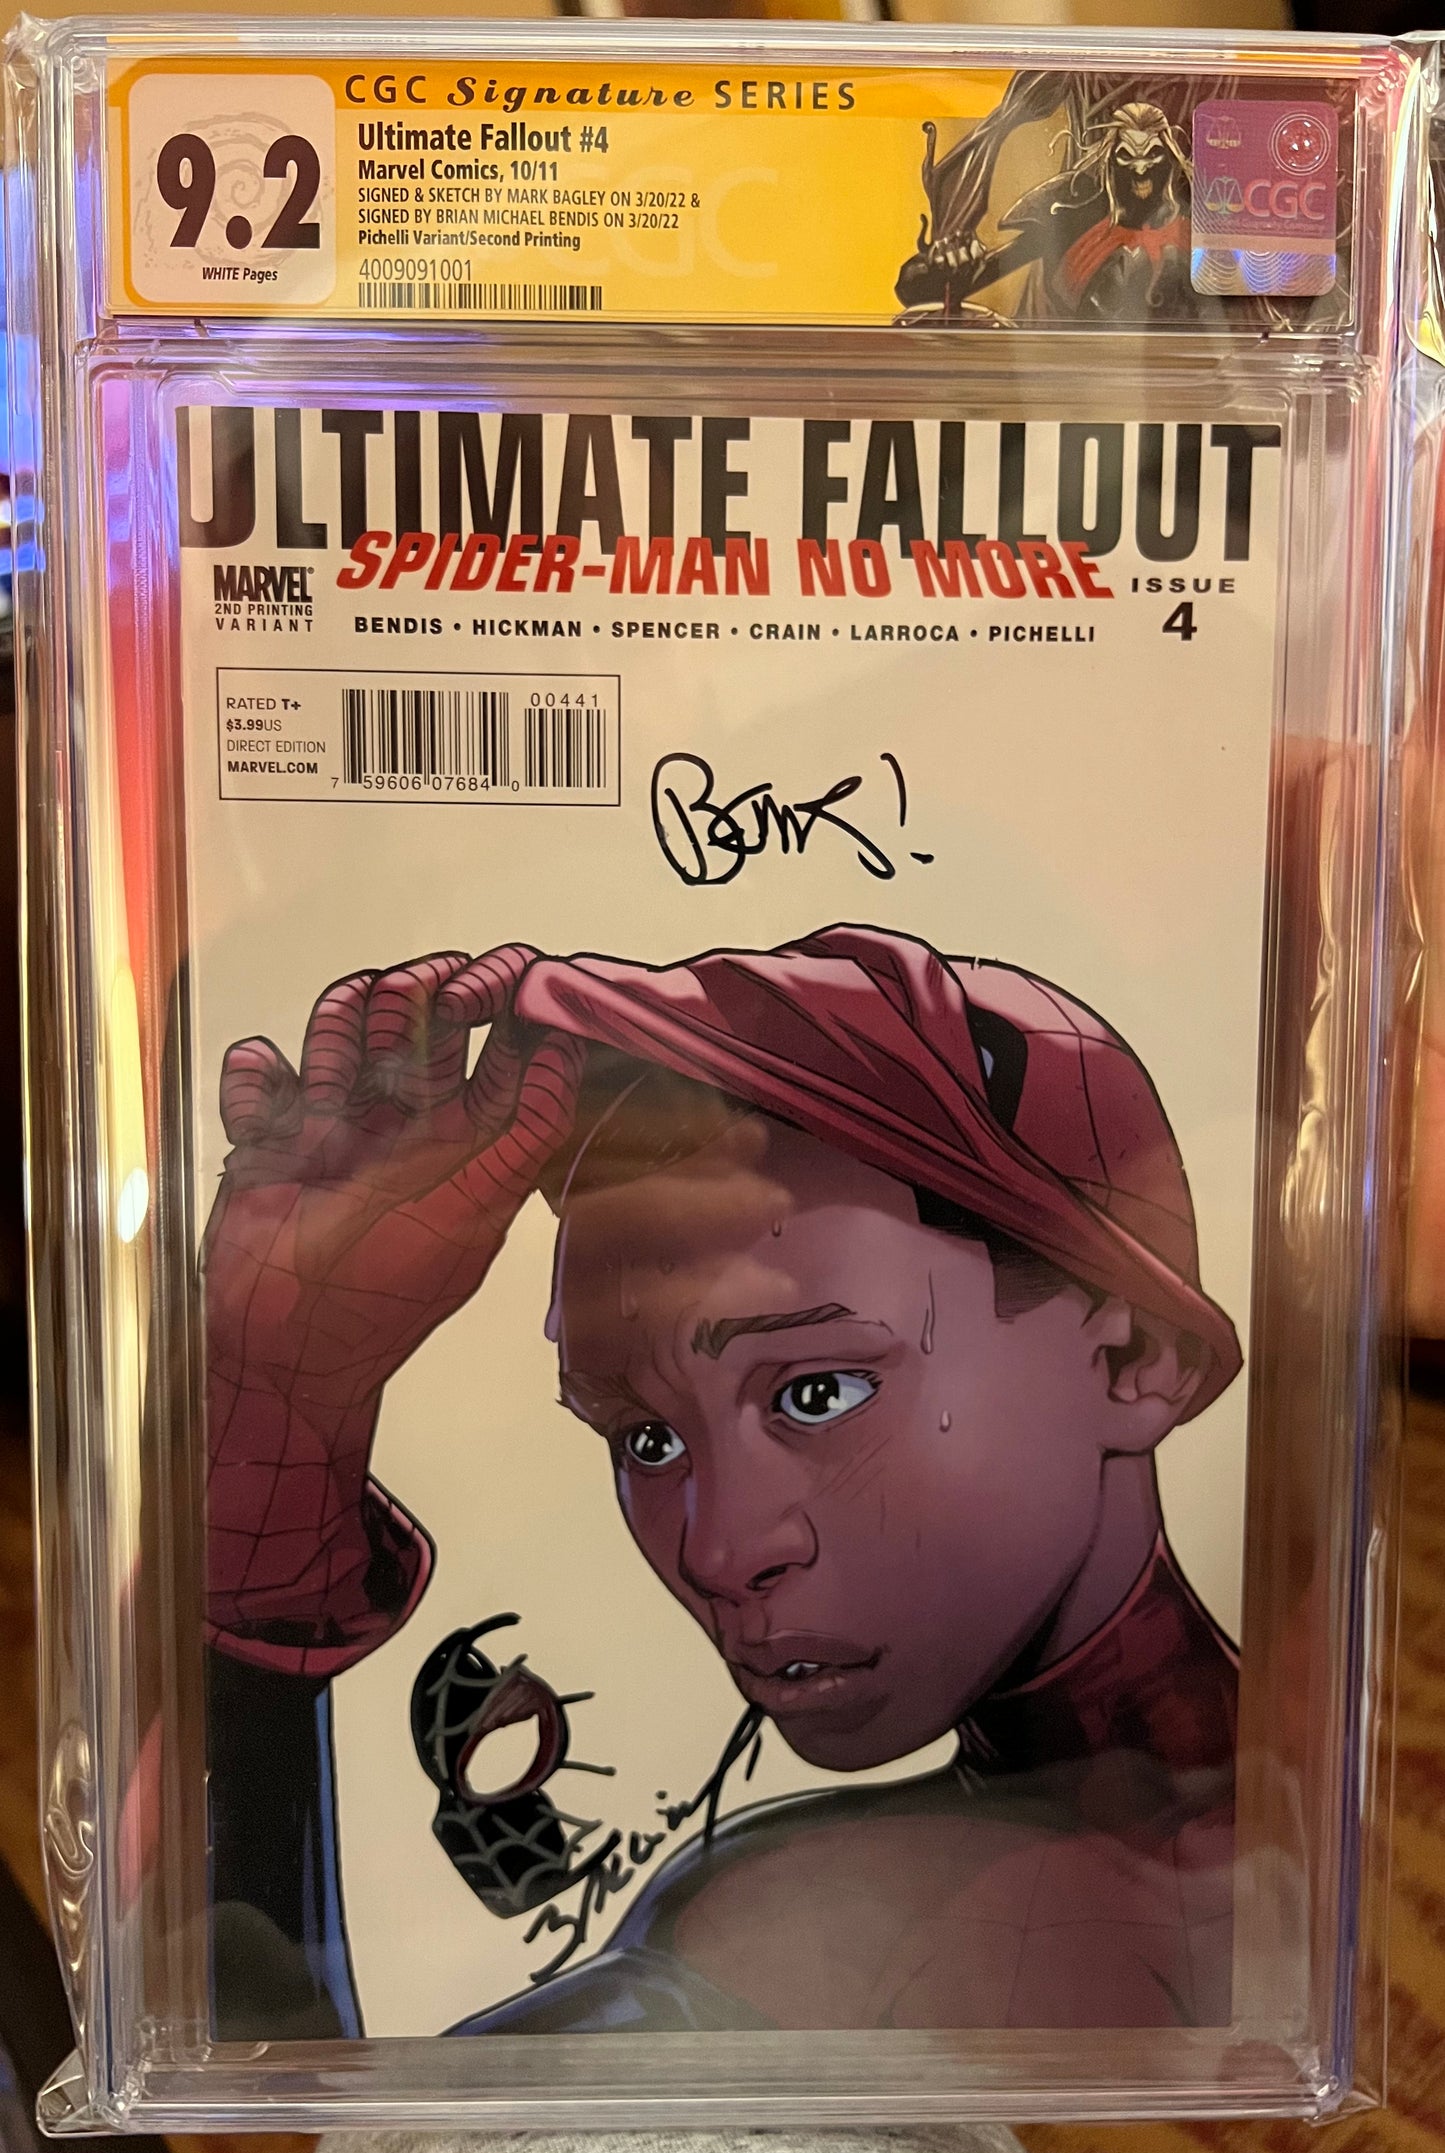 Ultimate Fallout #4 CGC SS 9.2 (Pichelli Variant/Second Printing) Signed/Sketched by Mark Bagley, Signed by Brian Michael Bendis